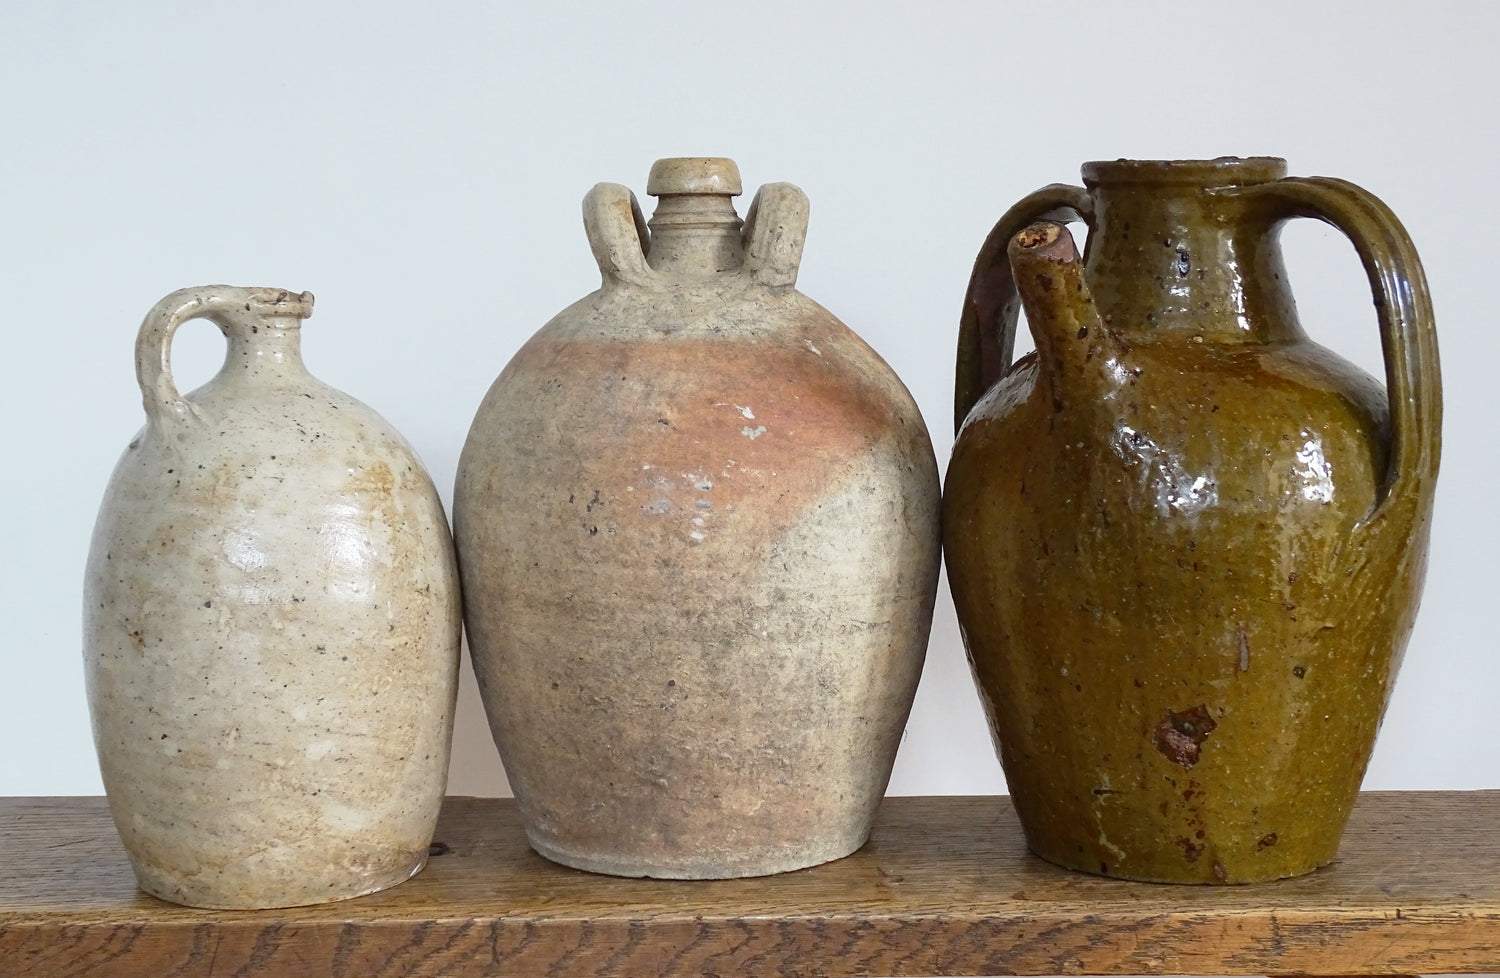 Antique French pottery pitchers, terracotta jugs and a green glazed terracotta walnut oil jug. 